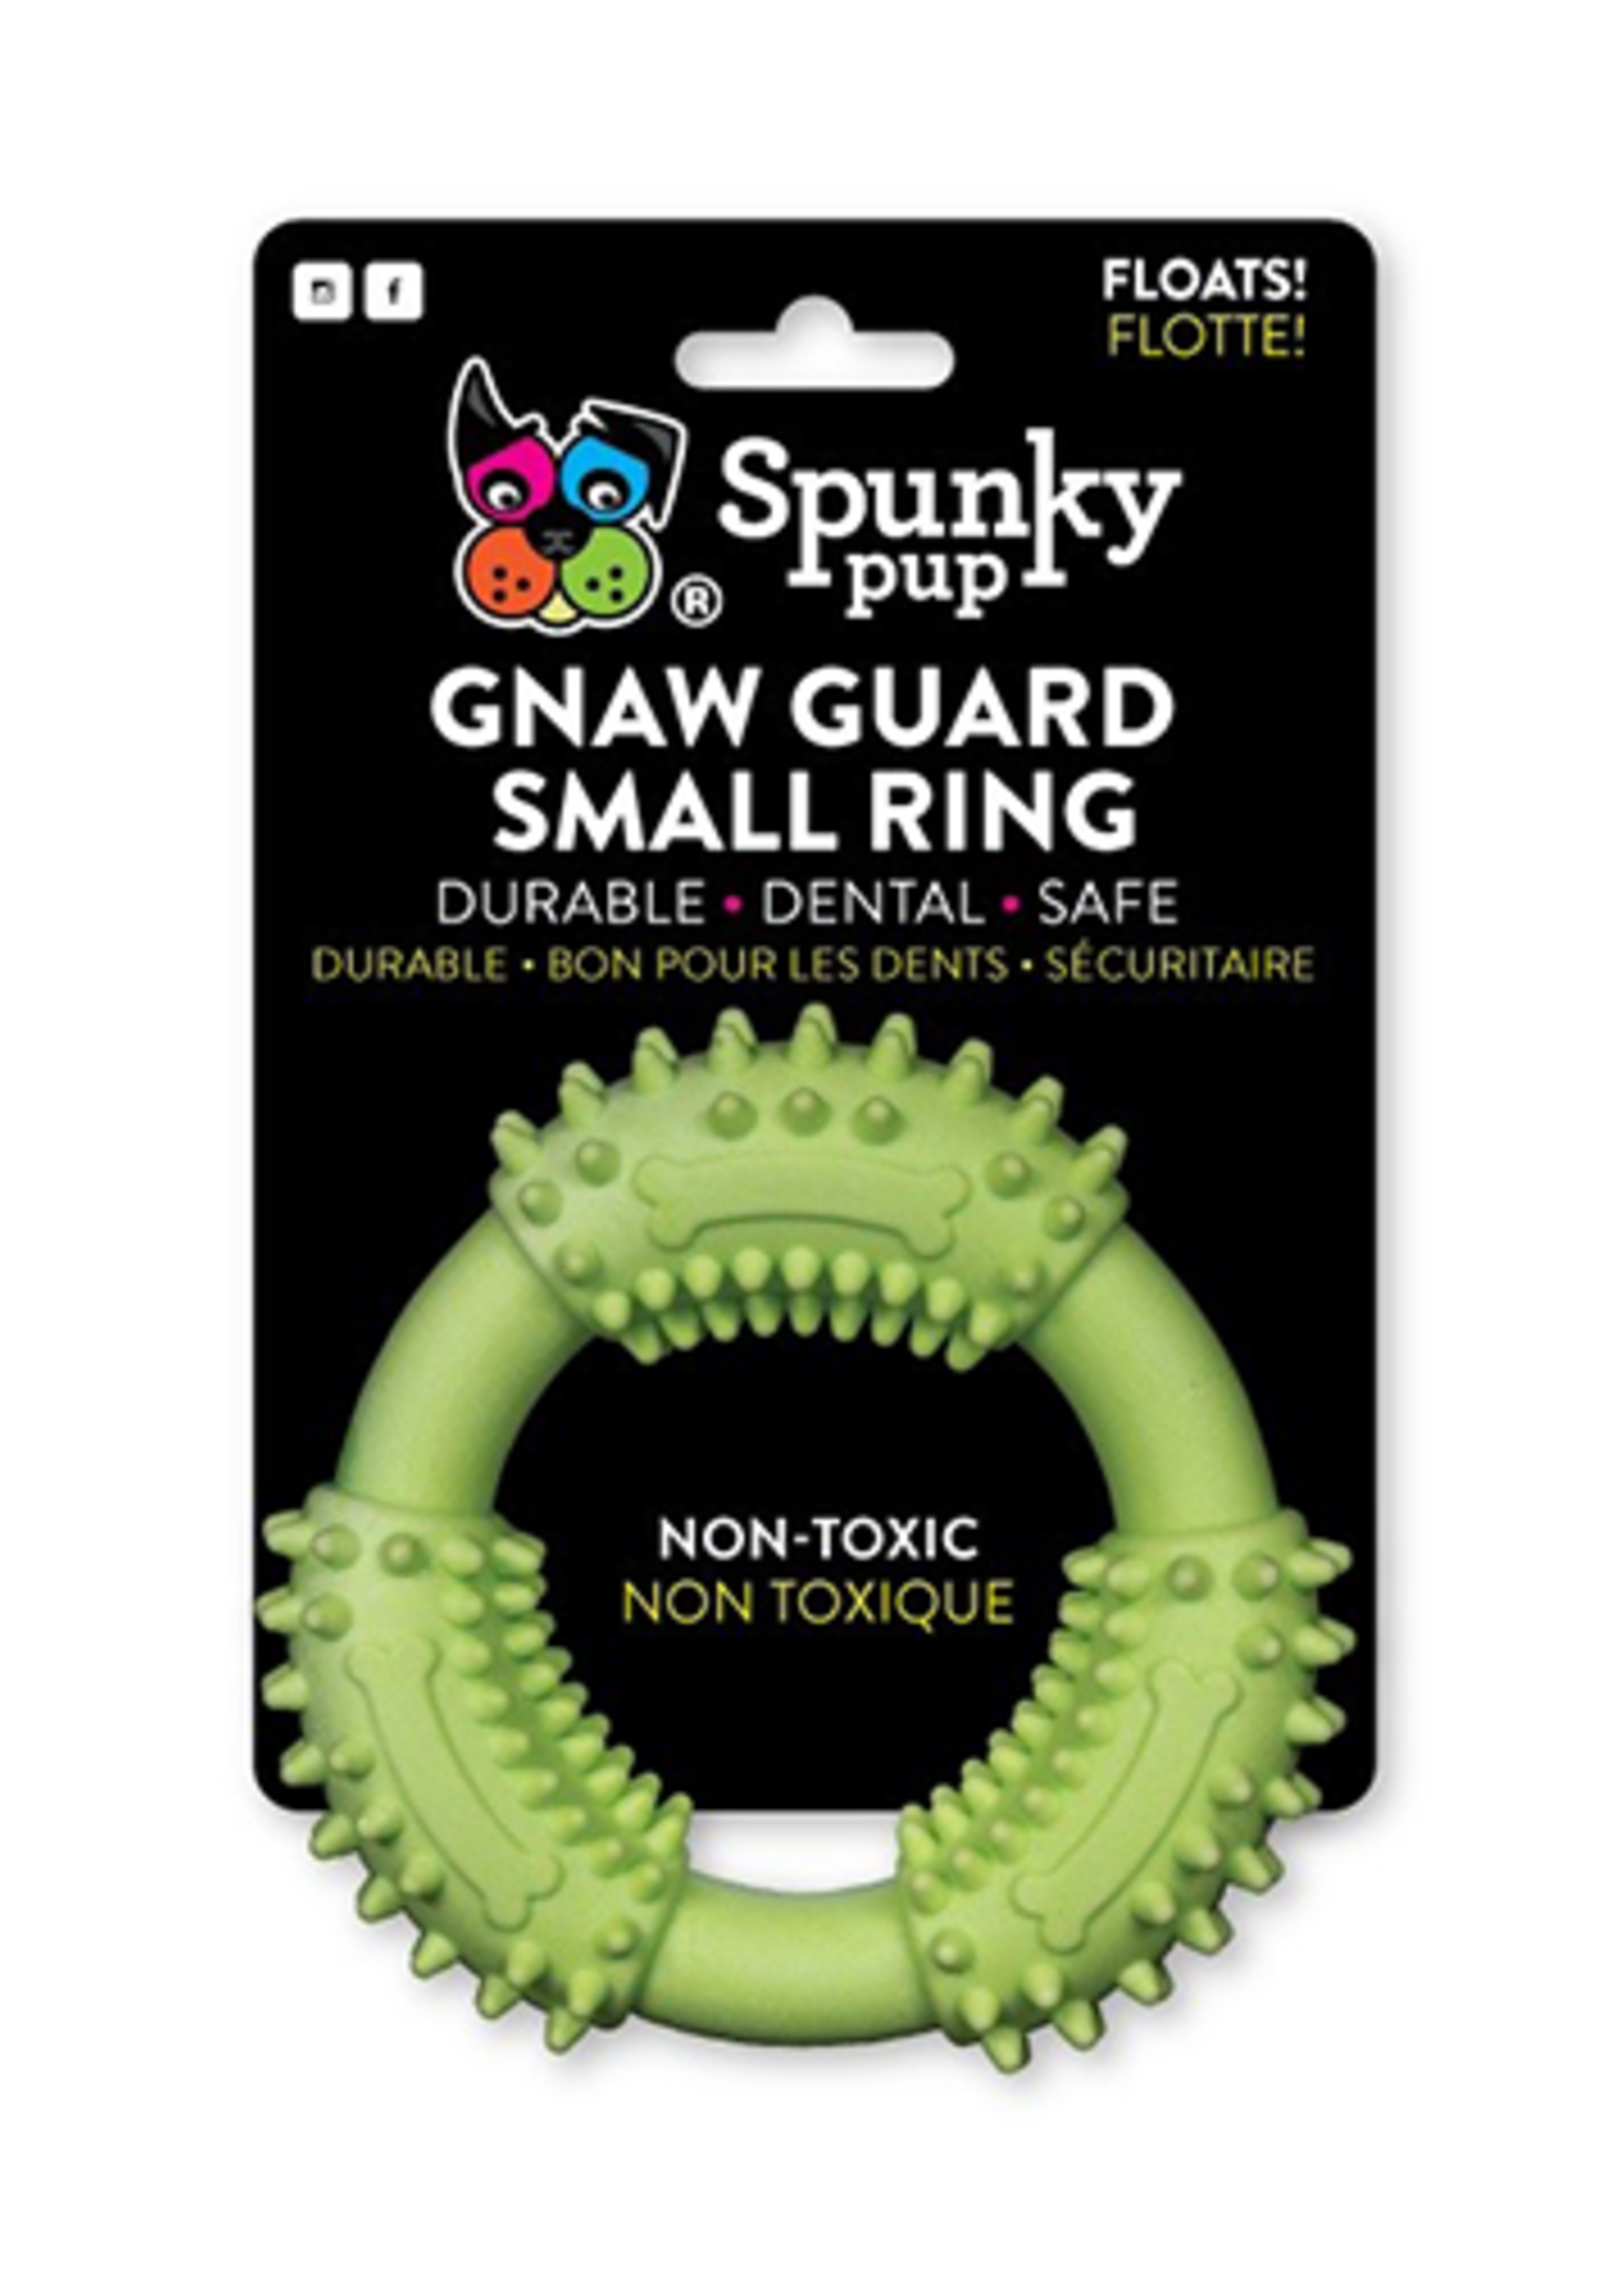 Spunky Pup Spunky Pup Gnaw Guard Foam Rings Dog Toy Small